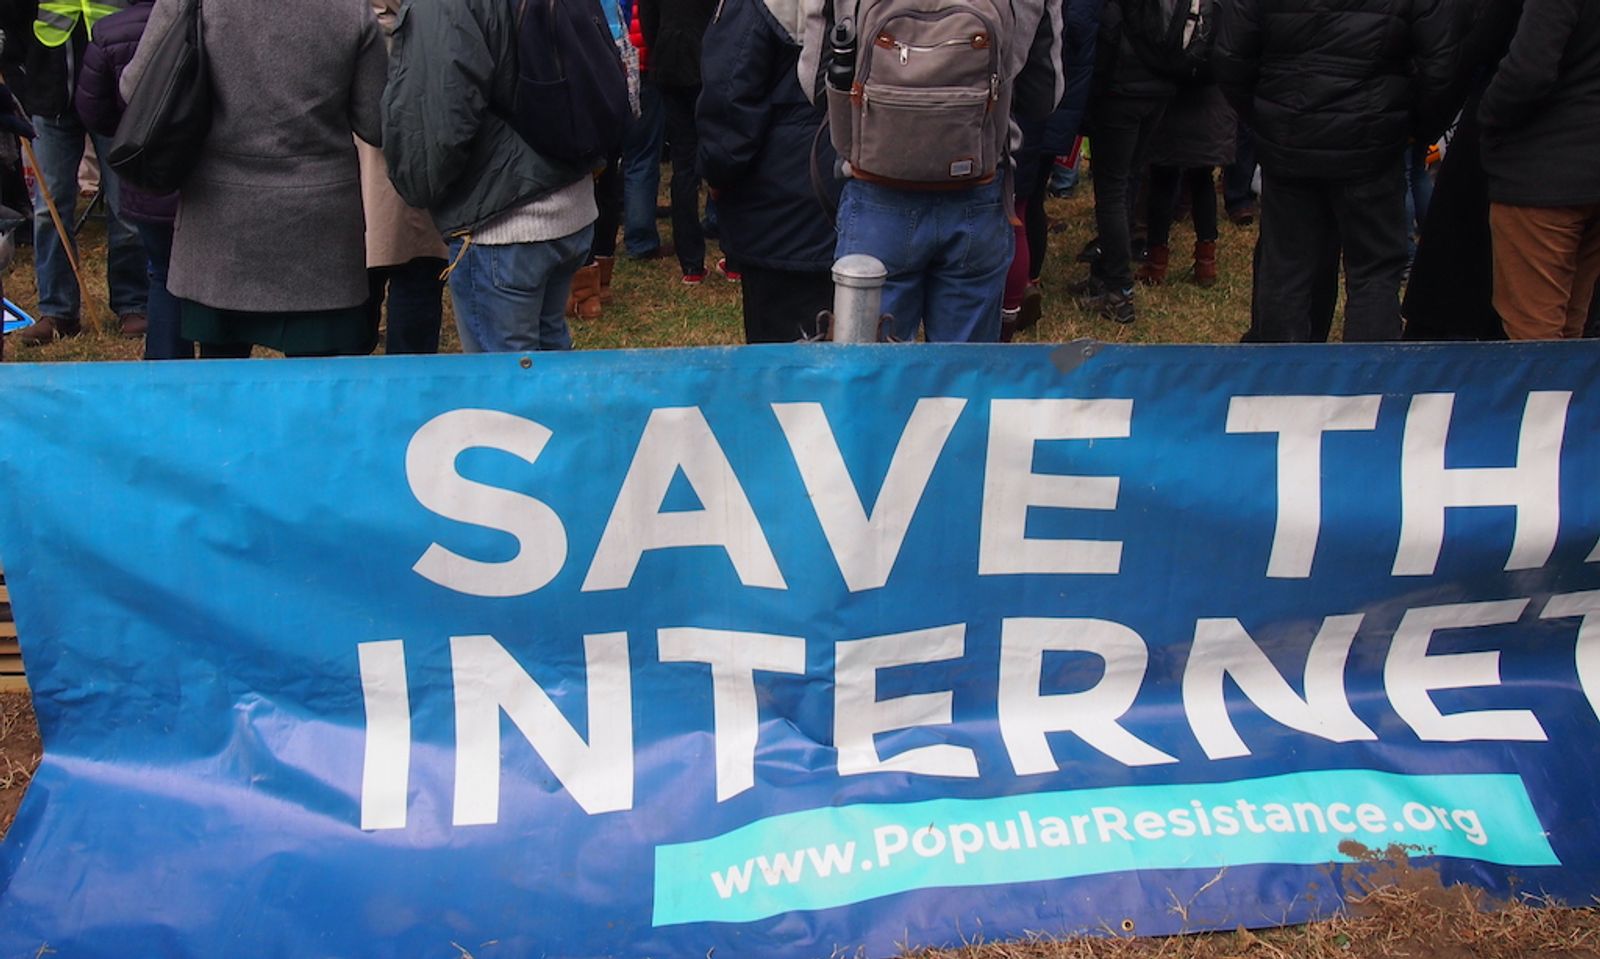 Mozilla, Reddit, Others Call on FCC to Reinstate Net Neutrality